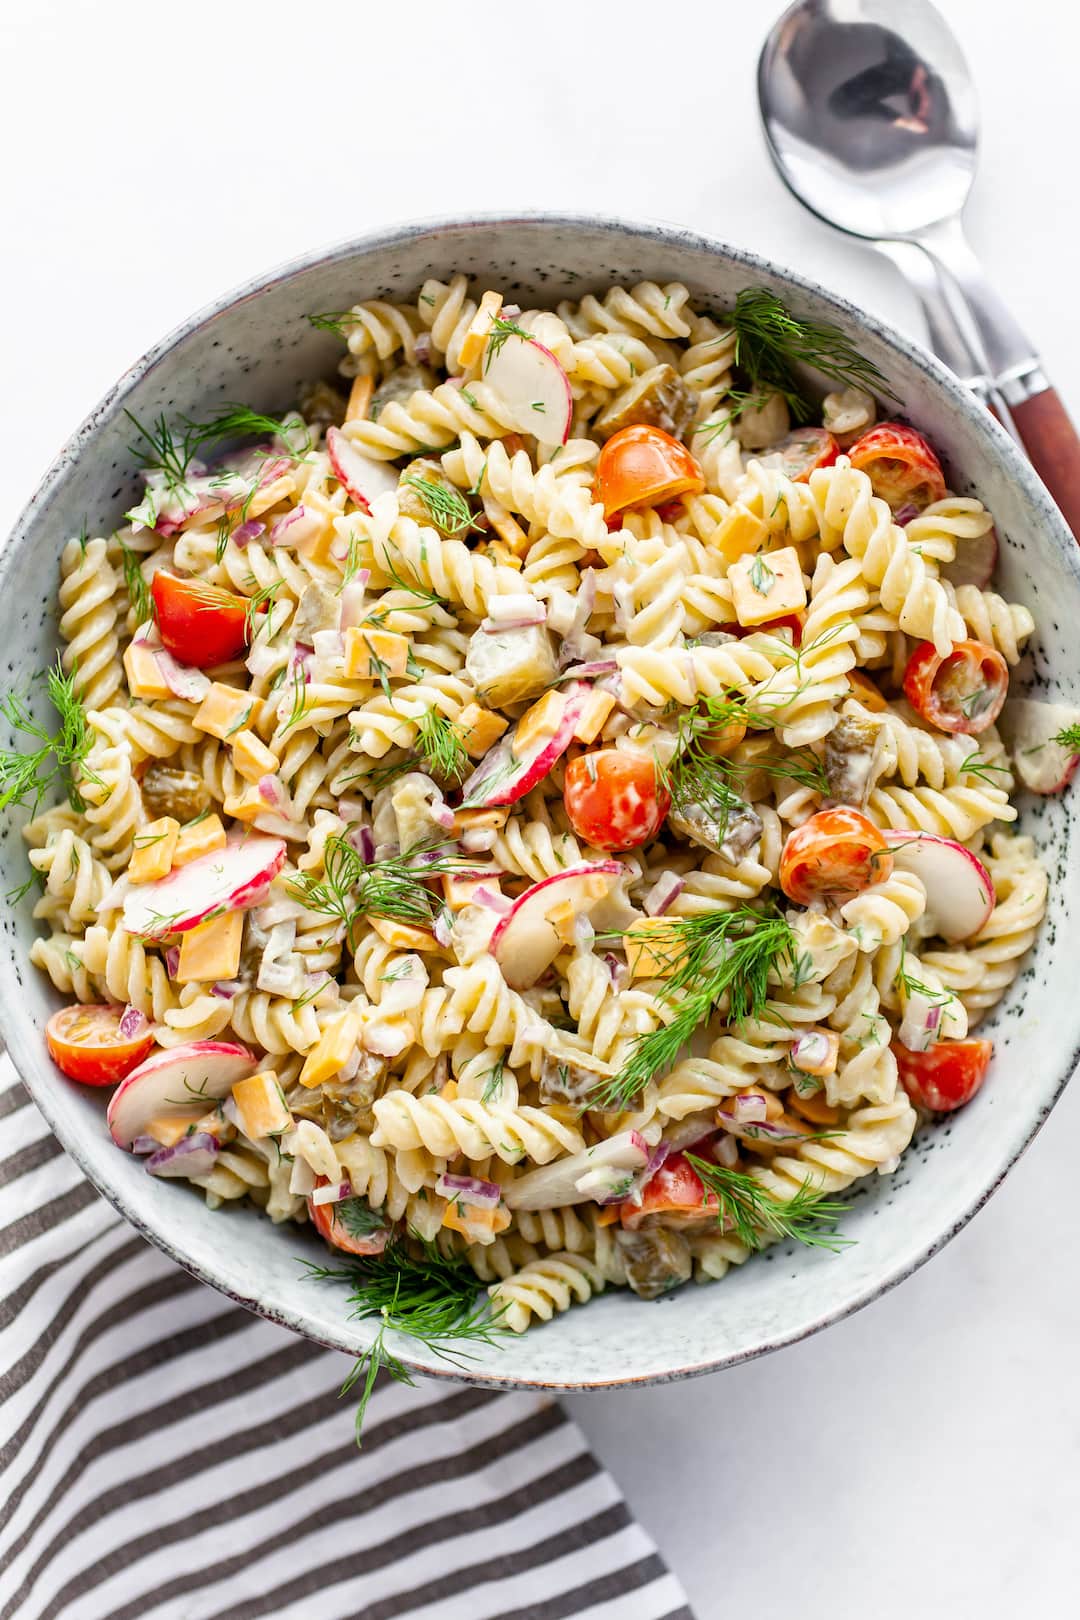 Best Ever Healthy Dill Pickle Pasta Salad